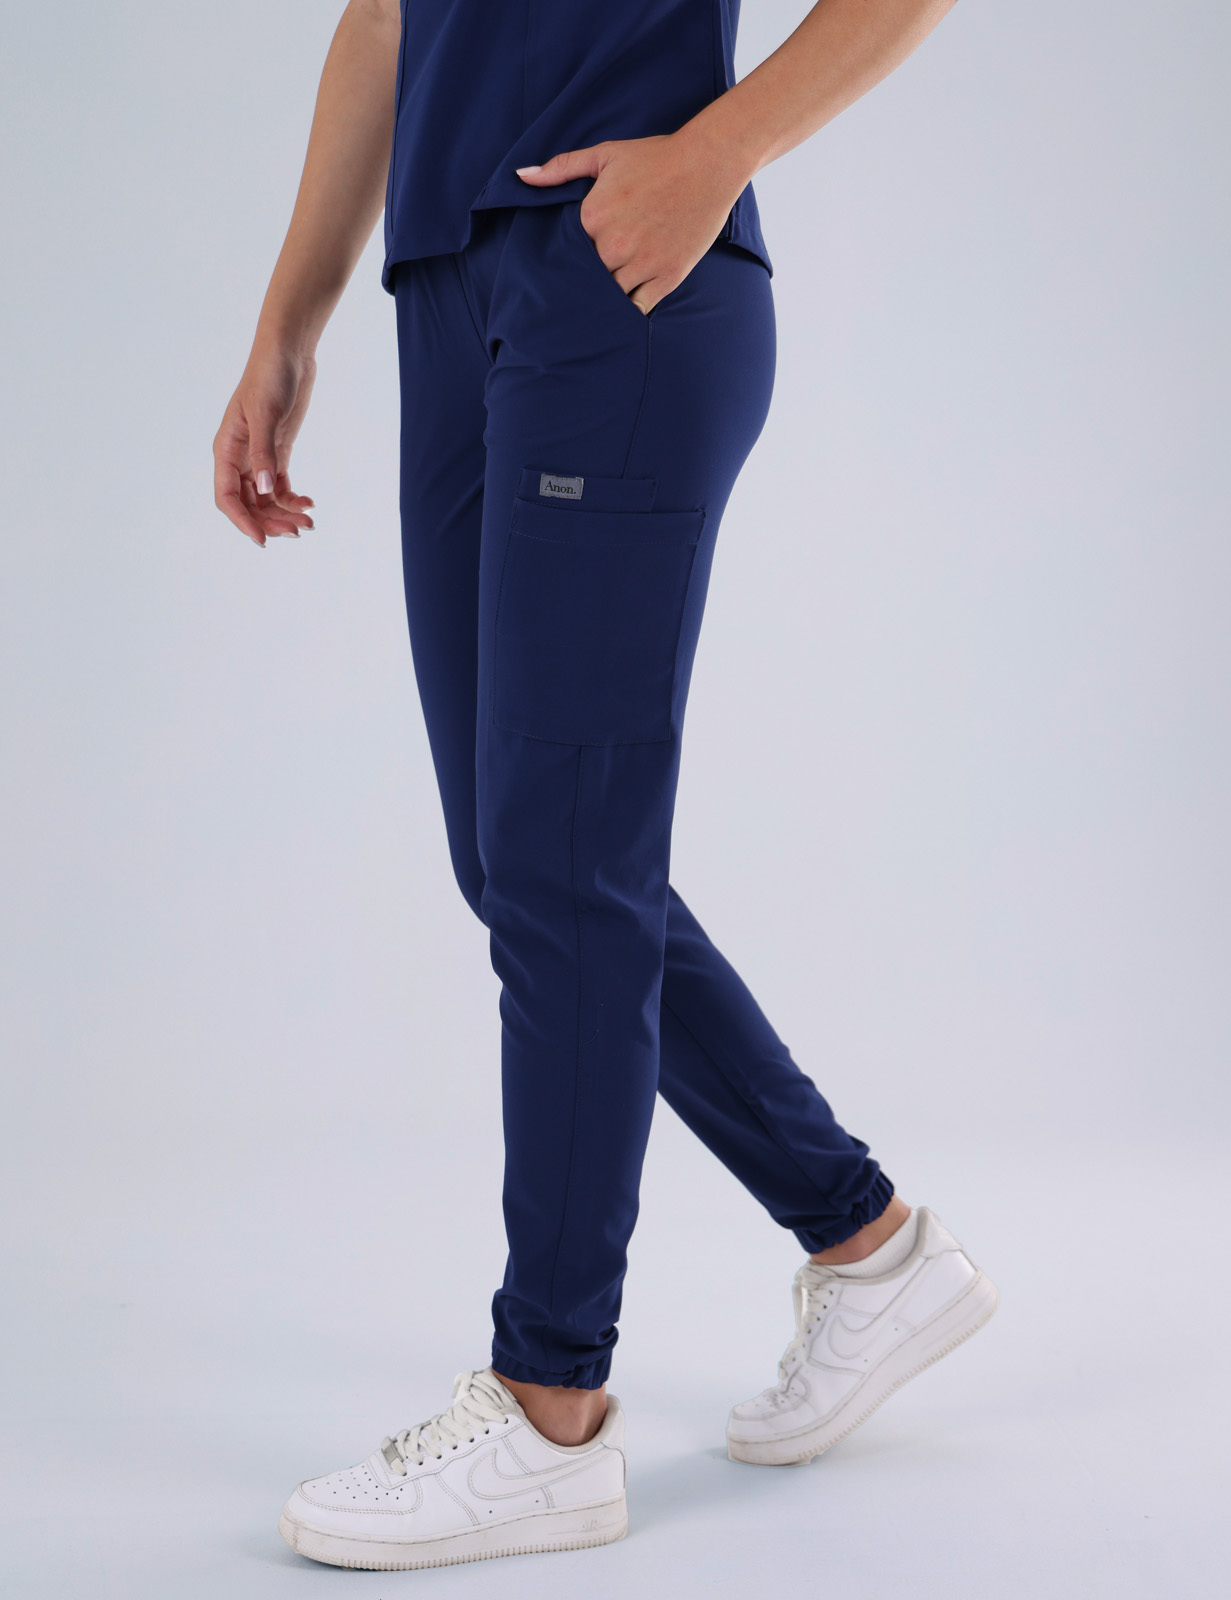 Anon Women's Jogger Pants (Poly/Spandex) - Midnight Blue